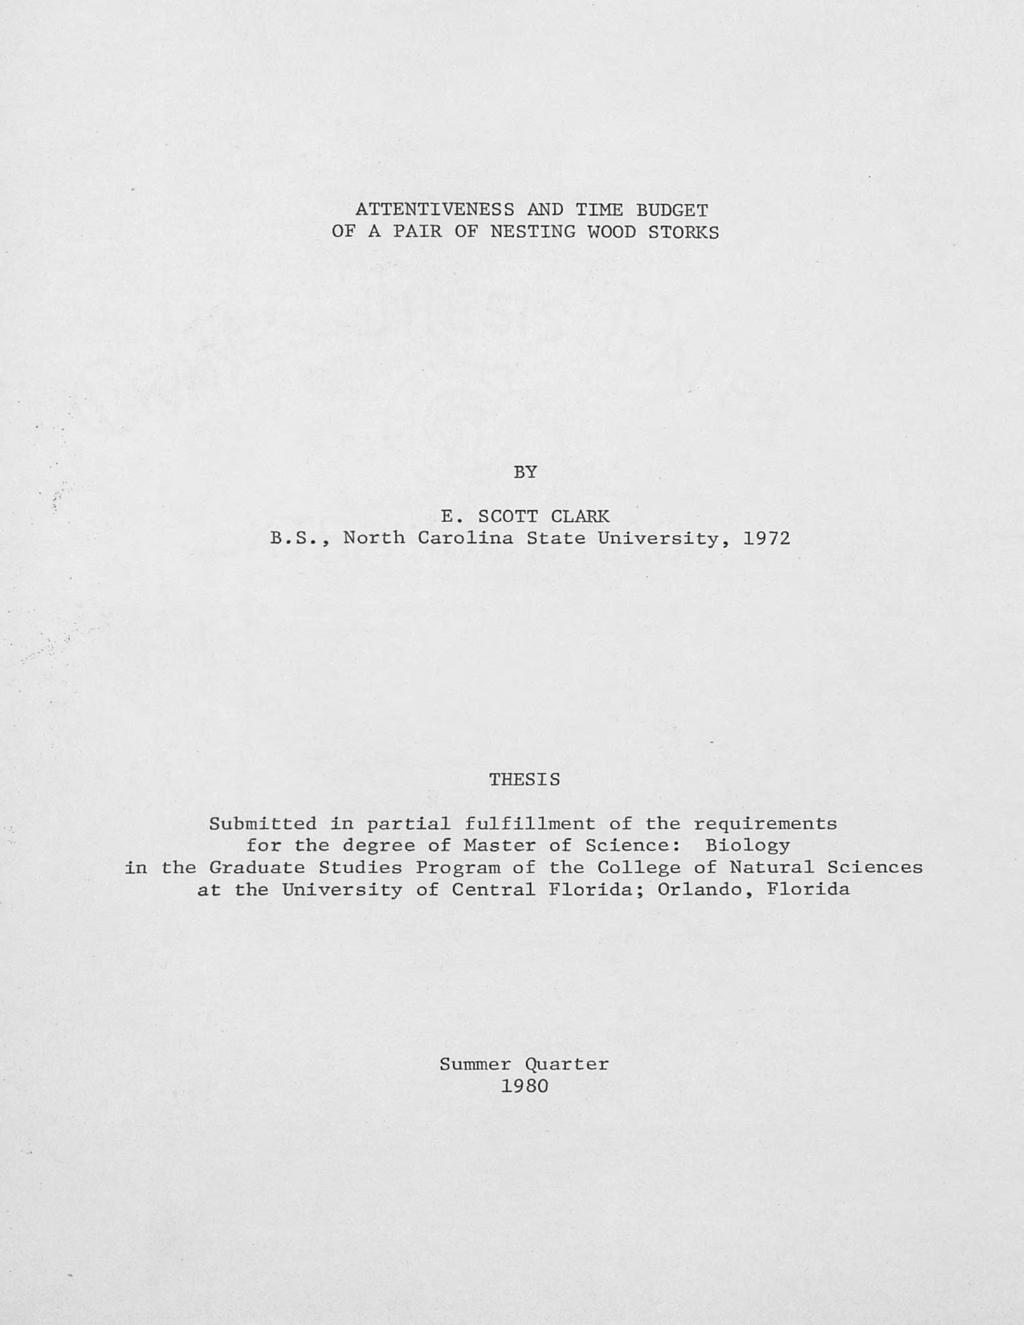 ATTENTIVENESS AND TIME BUDGET OF A PAIR OF NESTING WOOD STORKS BY E. SCOTT CLARK B.S., North Carolina State University, 1972.